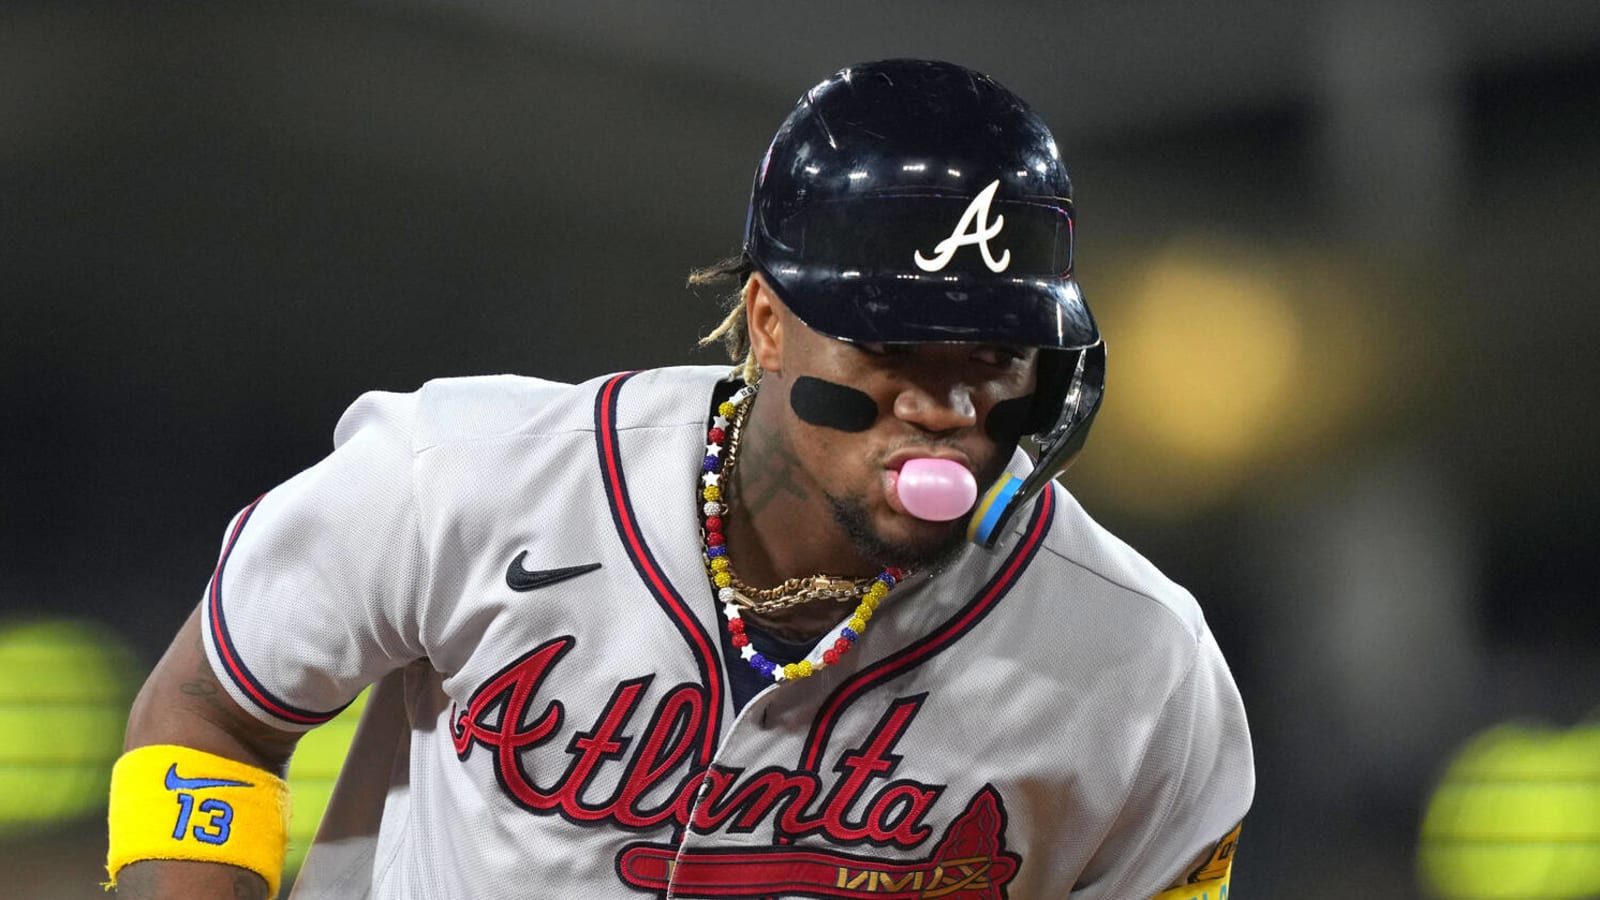 Dodgers prepared the perfect gift for Ronald Acuna Jr.